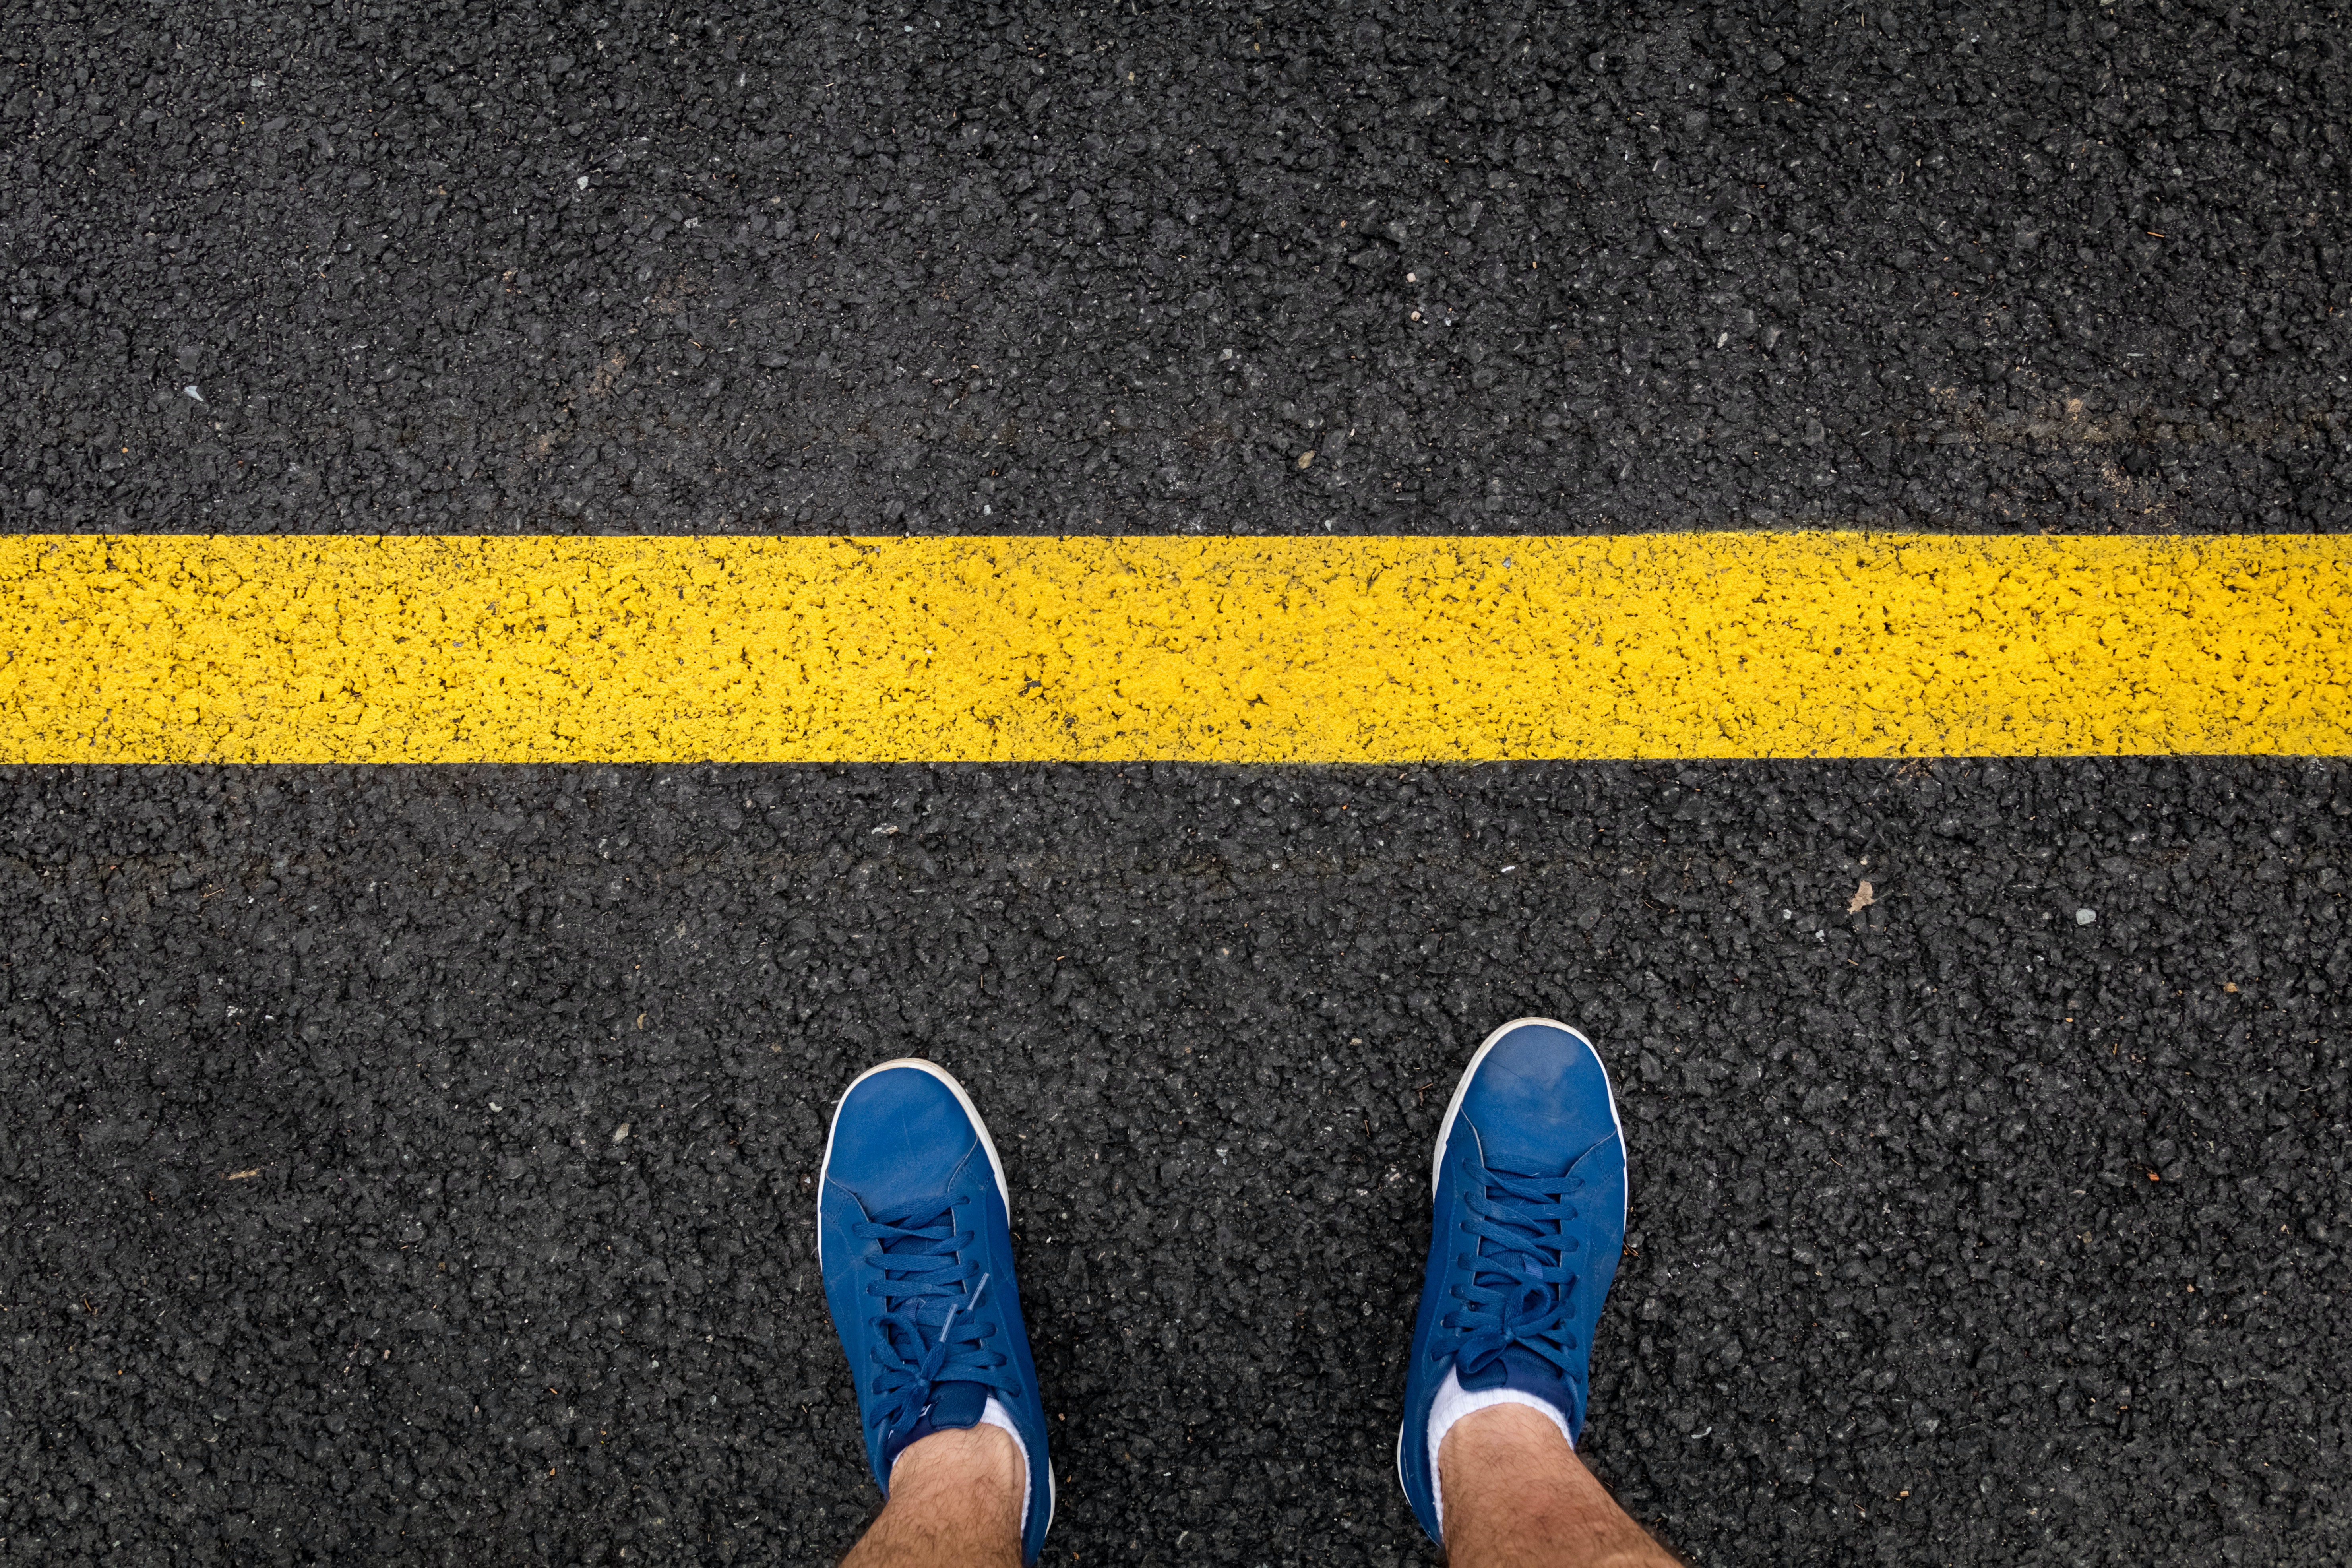 Picture of two feet next to a yellow line.